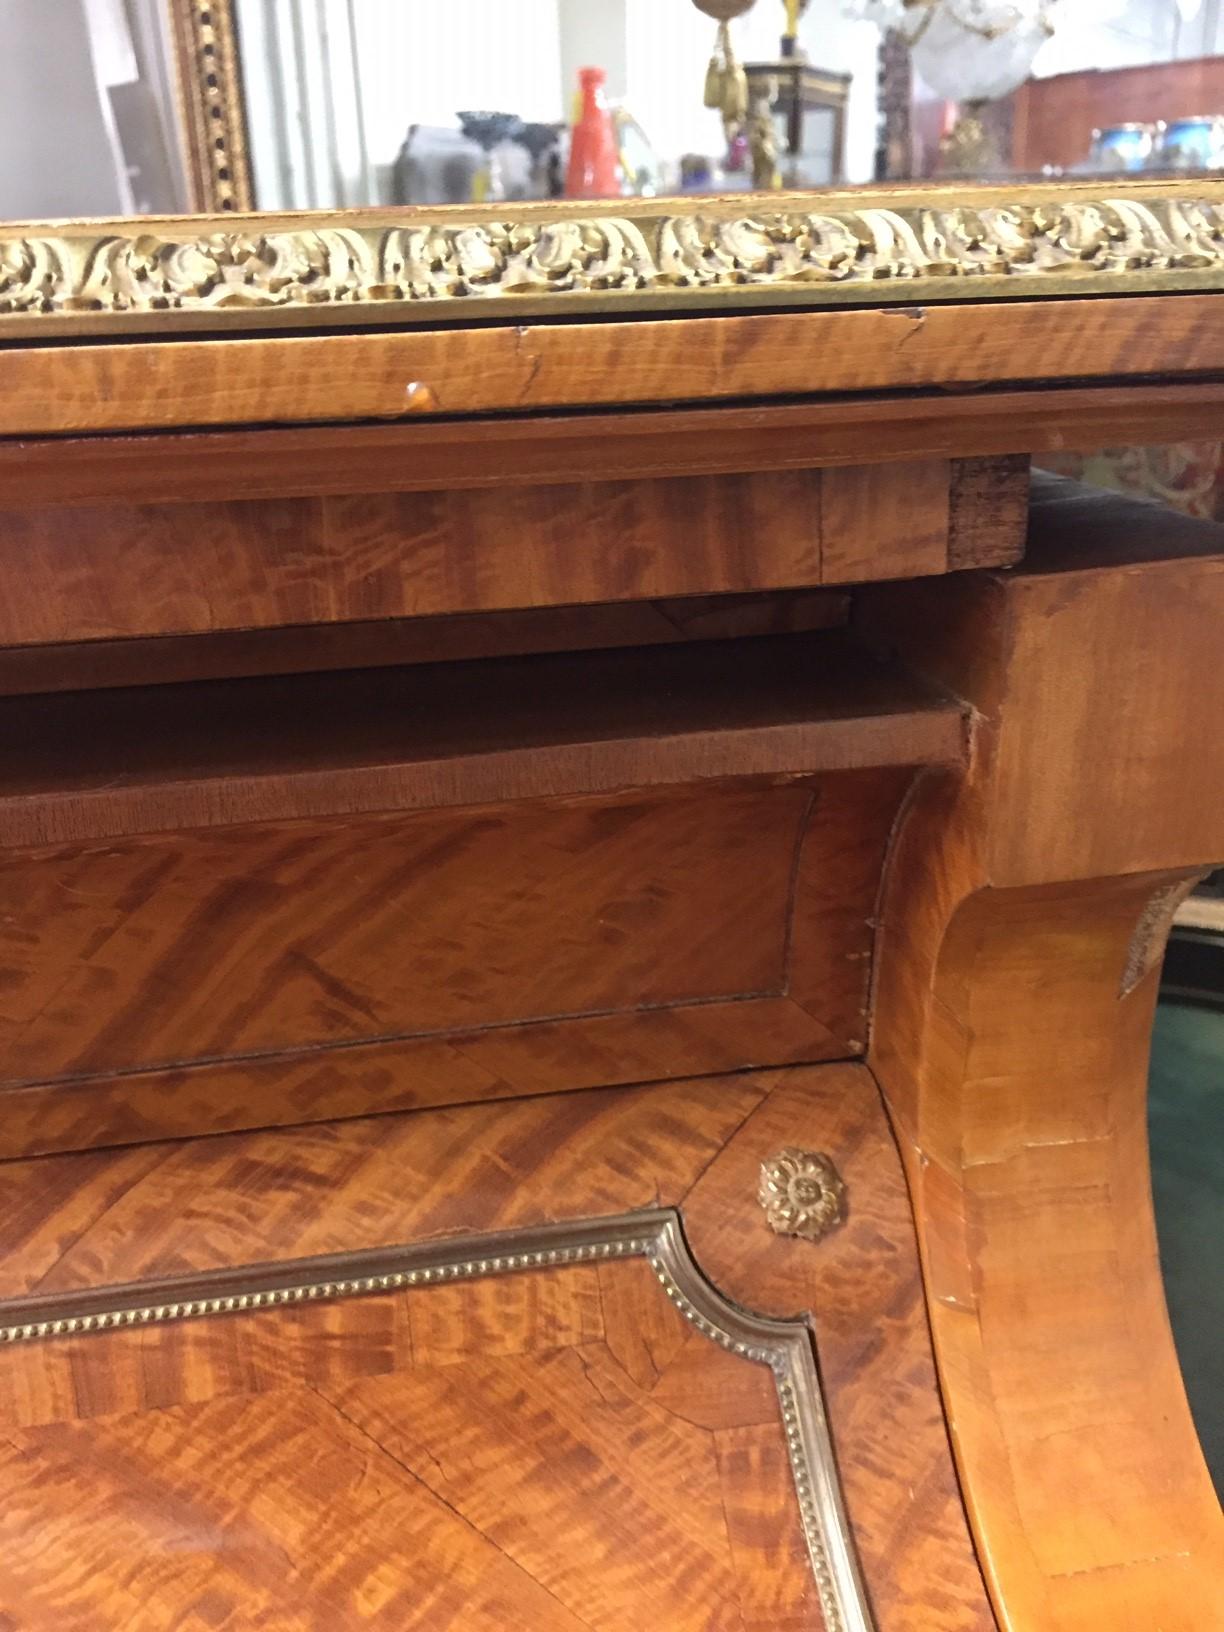 Wonderful Turn of the Century Gilt Bronze Mounted Six-Leg Grand Erard Piano In Good Condition For Sale In New York, NY